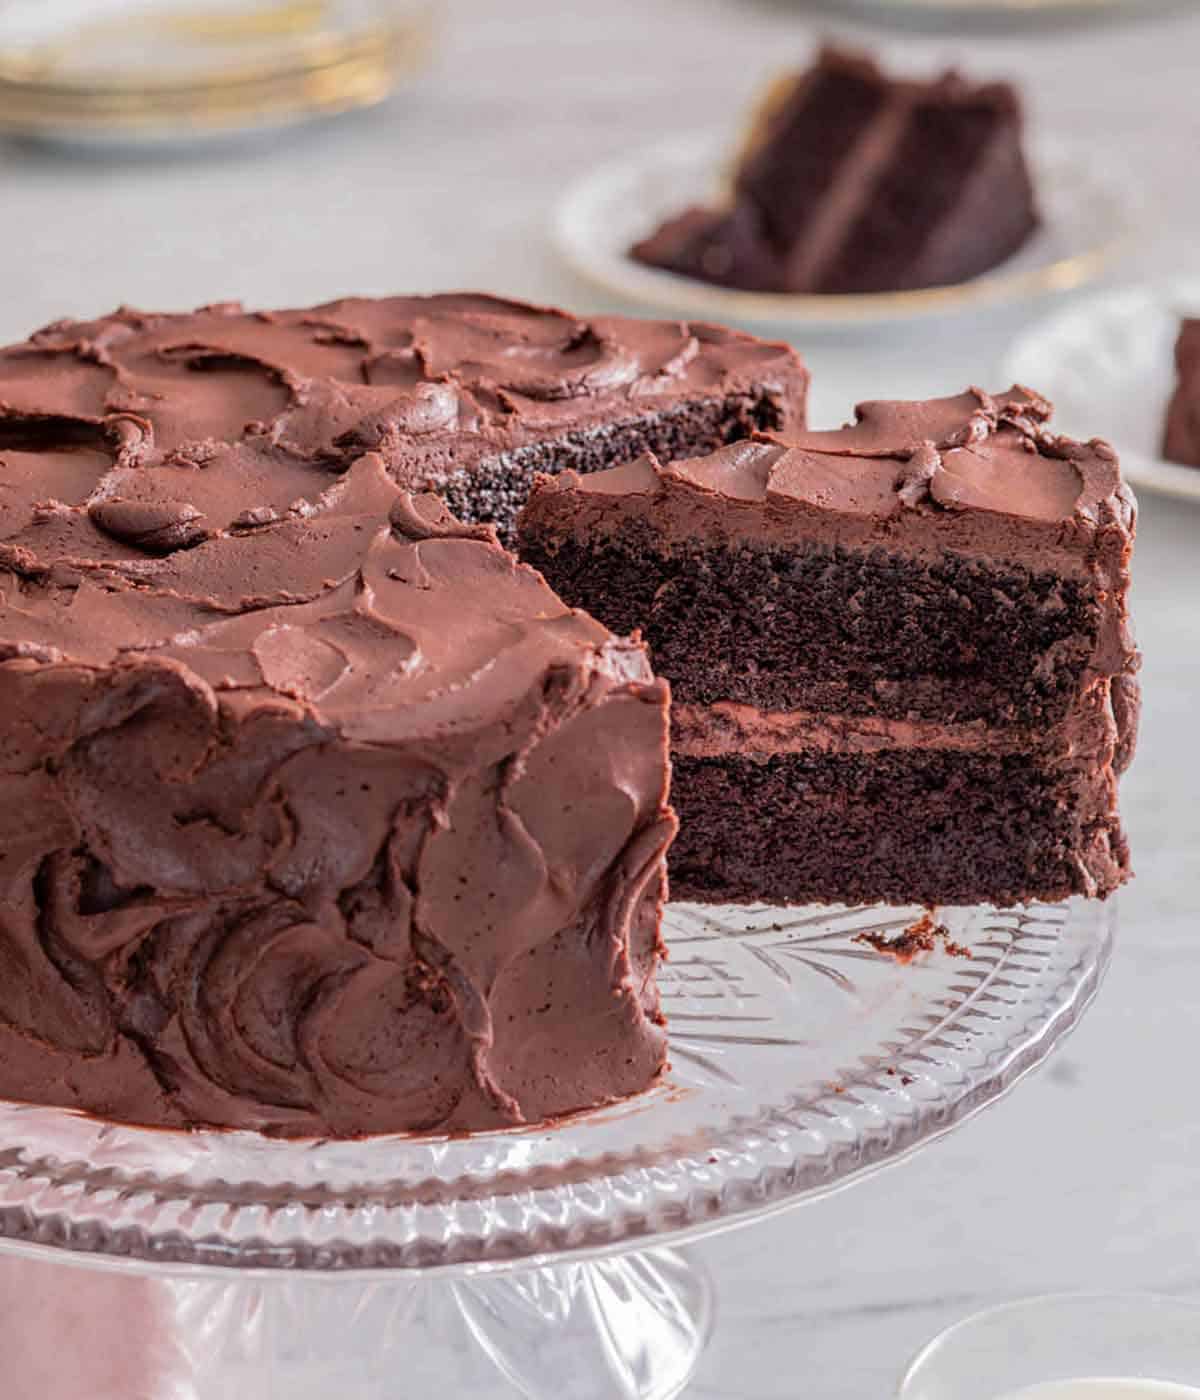 A cake stand with a devil’s food cake with a slice cut and slightly pulled out.